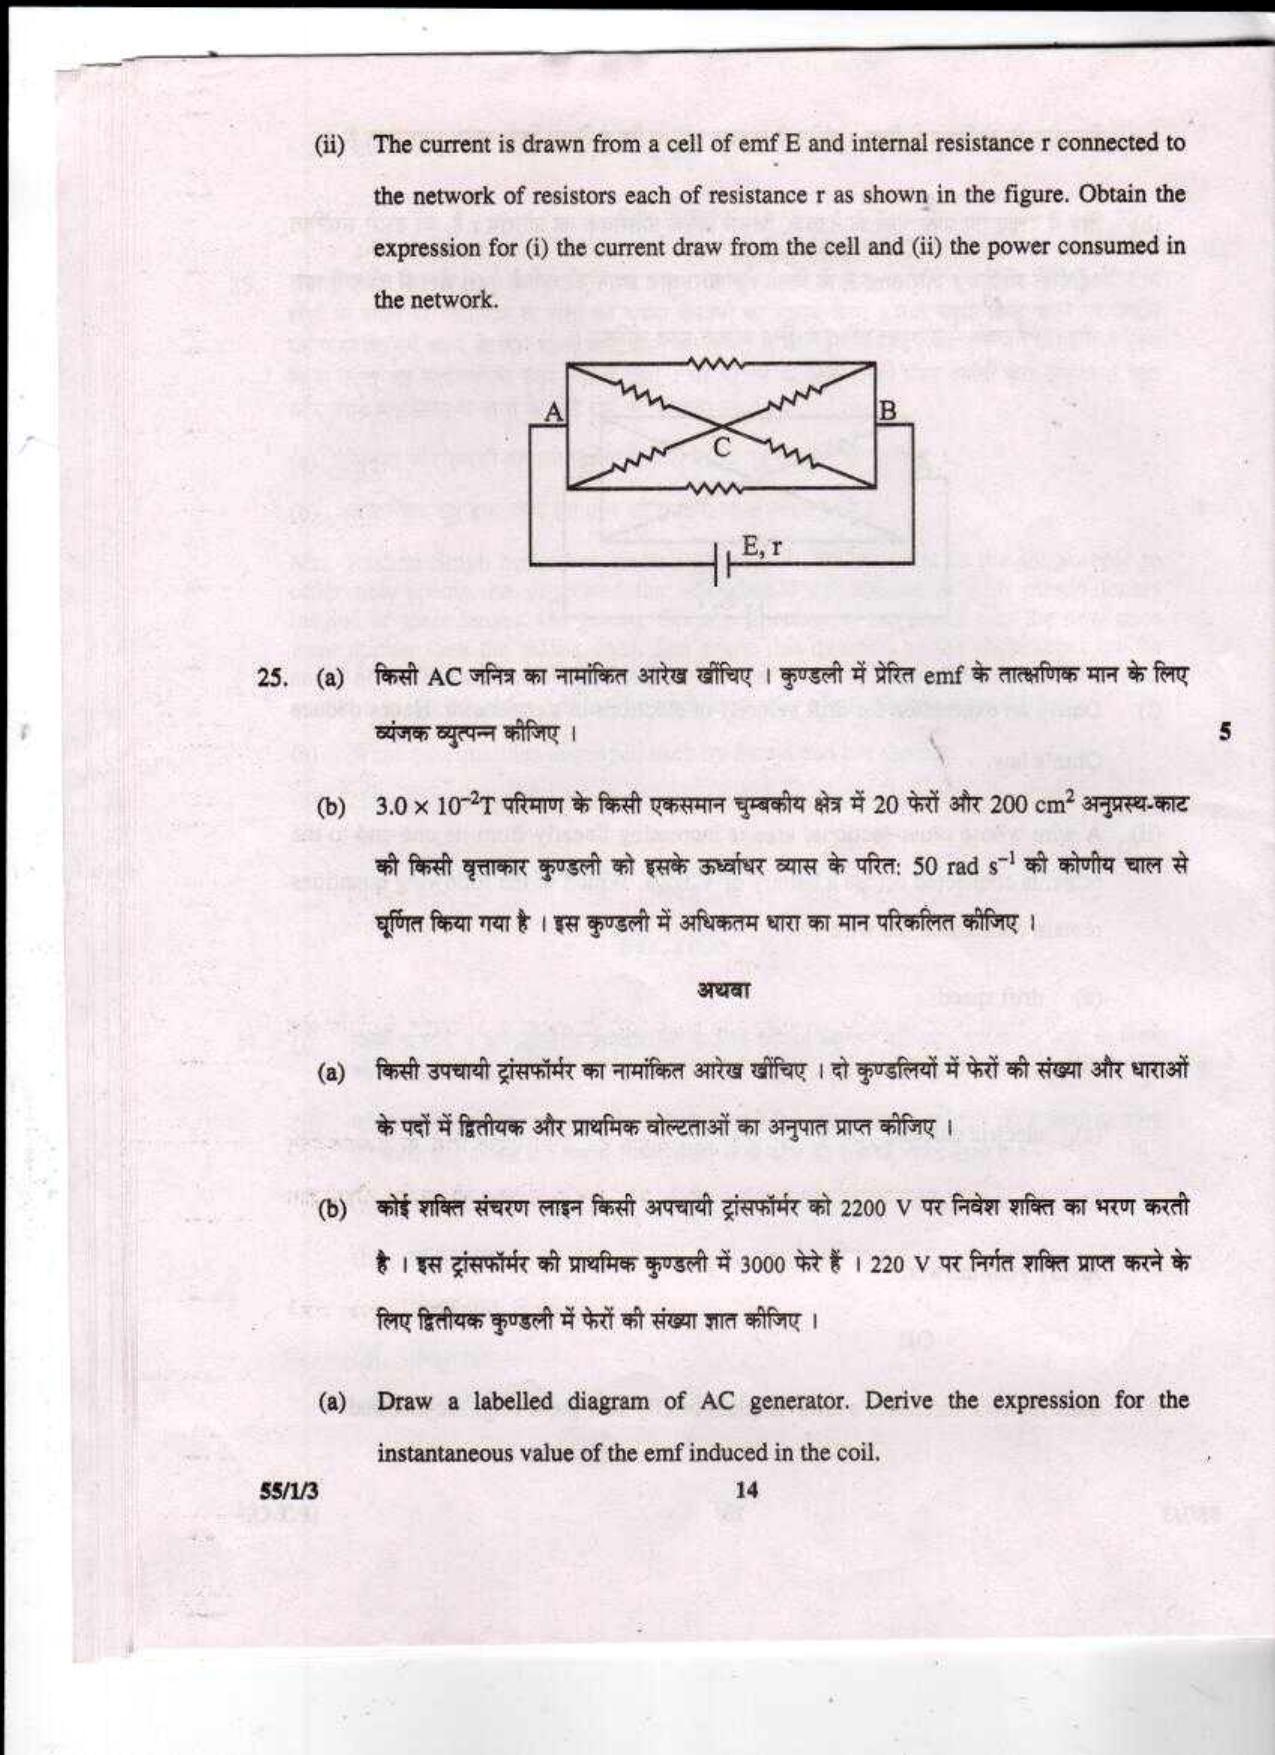 CBSE Class 12 Physics (Theory) SET 3-Delhi-12 2017 Question Paper - Page 14